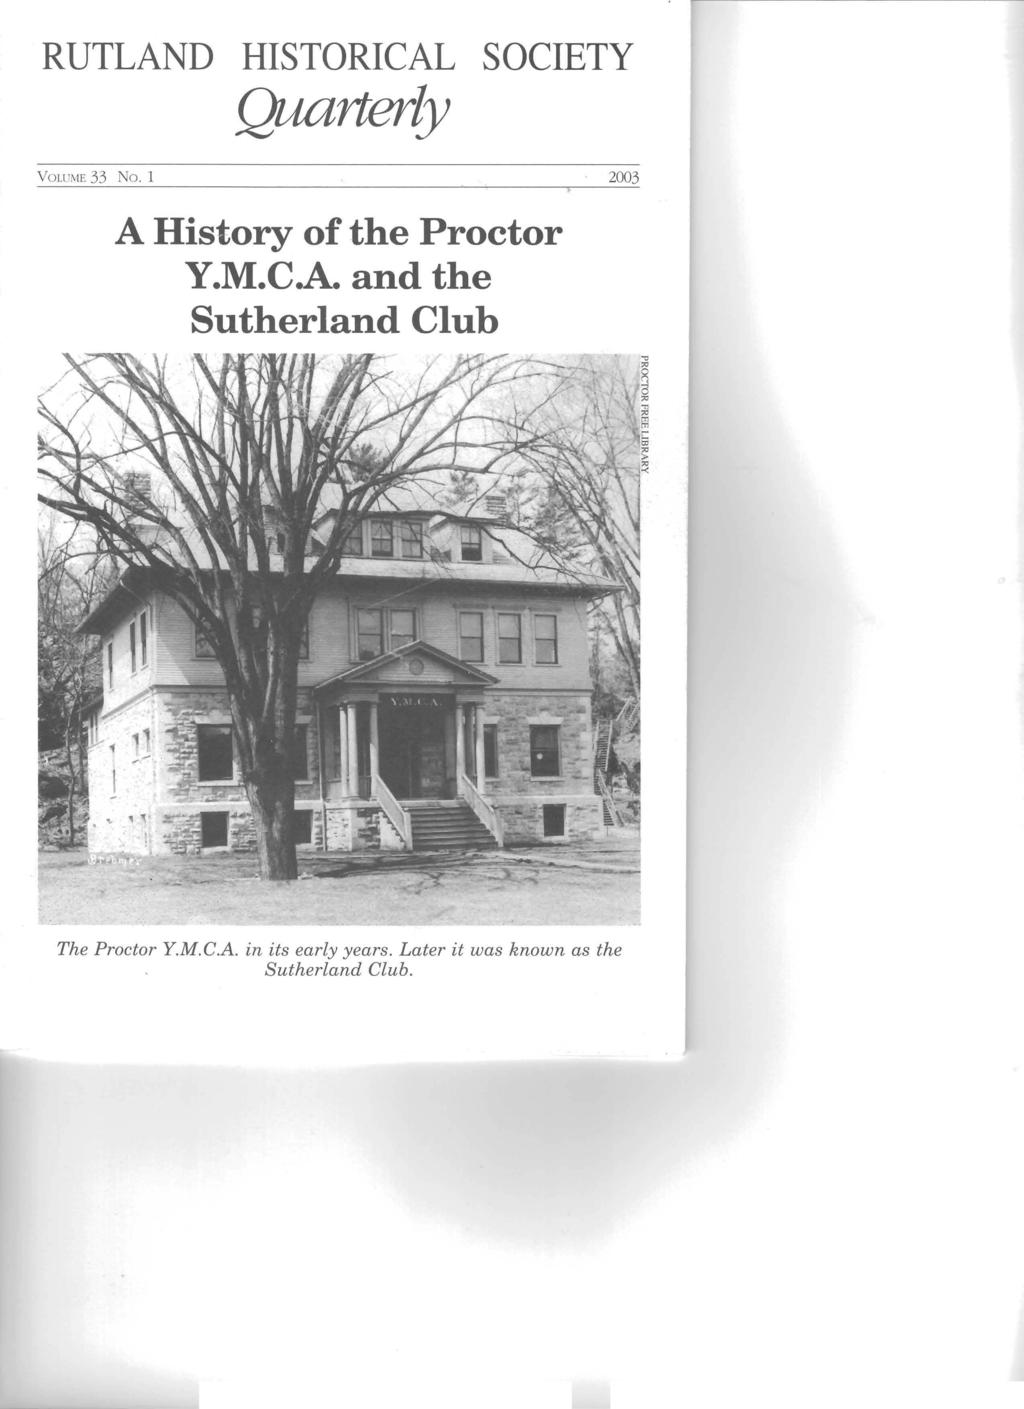 RUTLAND HISTORICAL SOCIETY Quarterly VOLUivlE 33 No.1 2003 A History of the Proctor Y.M.C.A. and the Sutherland Club The Proctor Y.